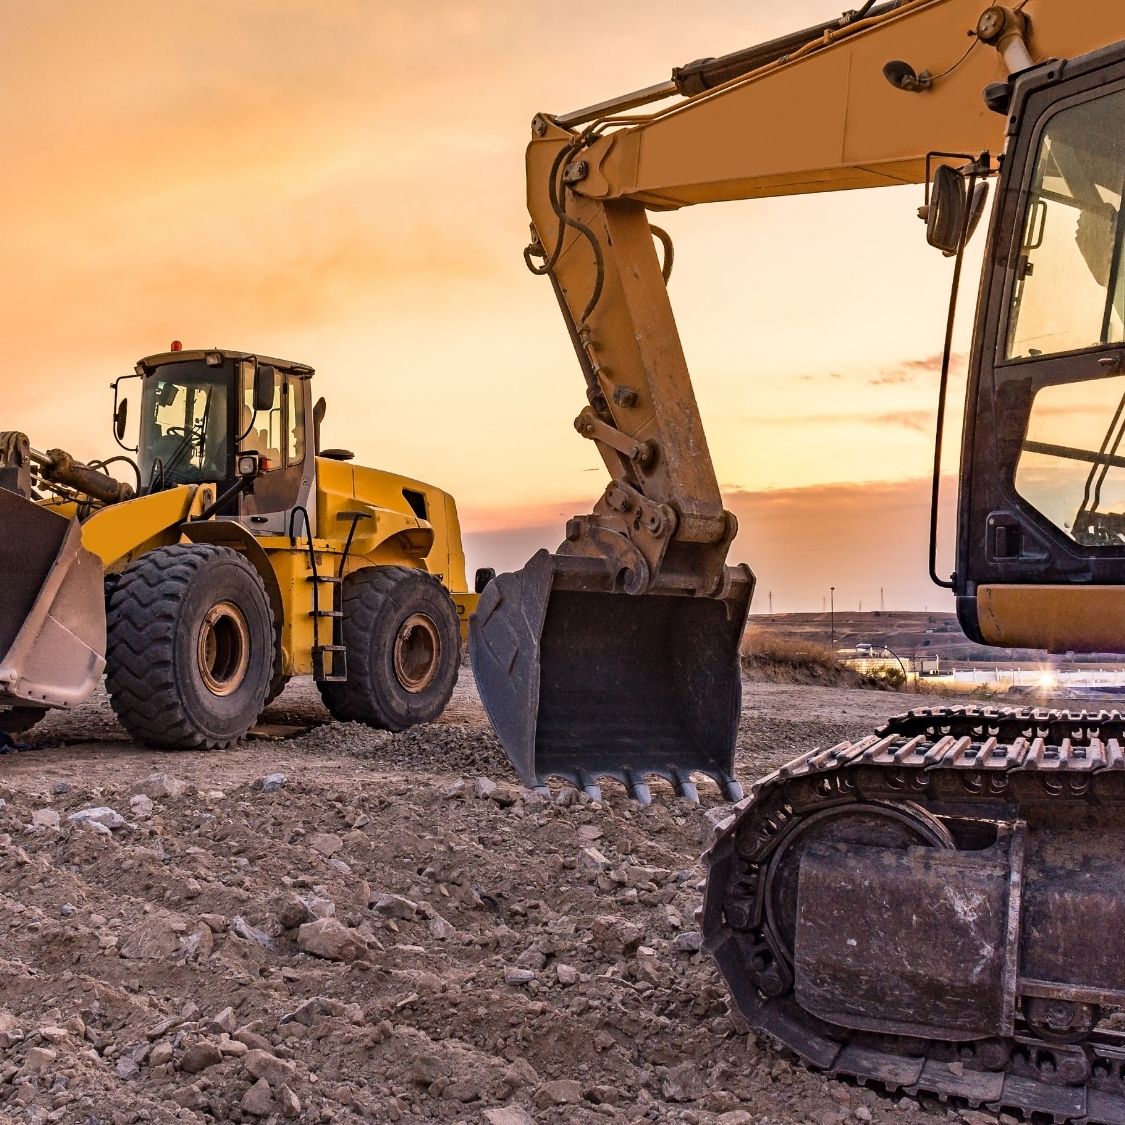 Common Types of Construction Vehicles & Their Uses